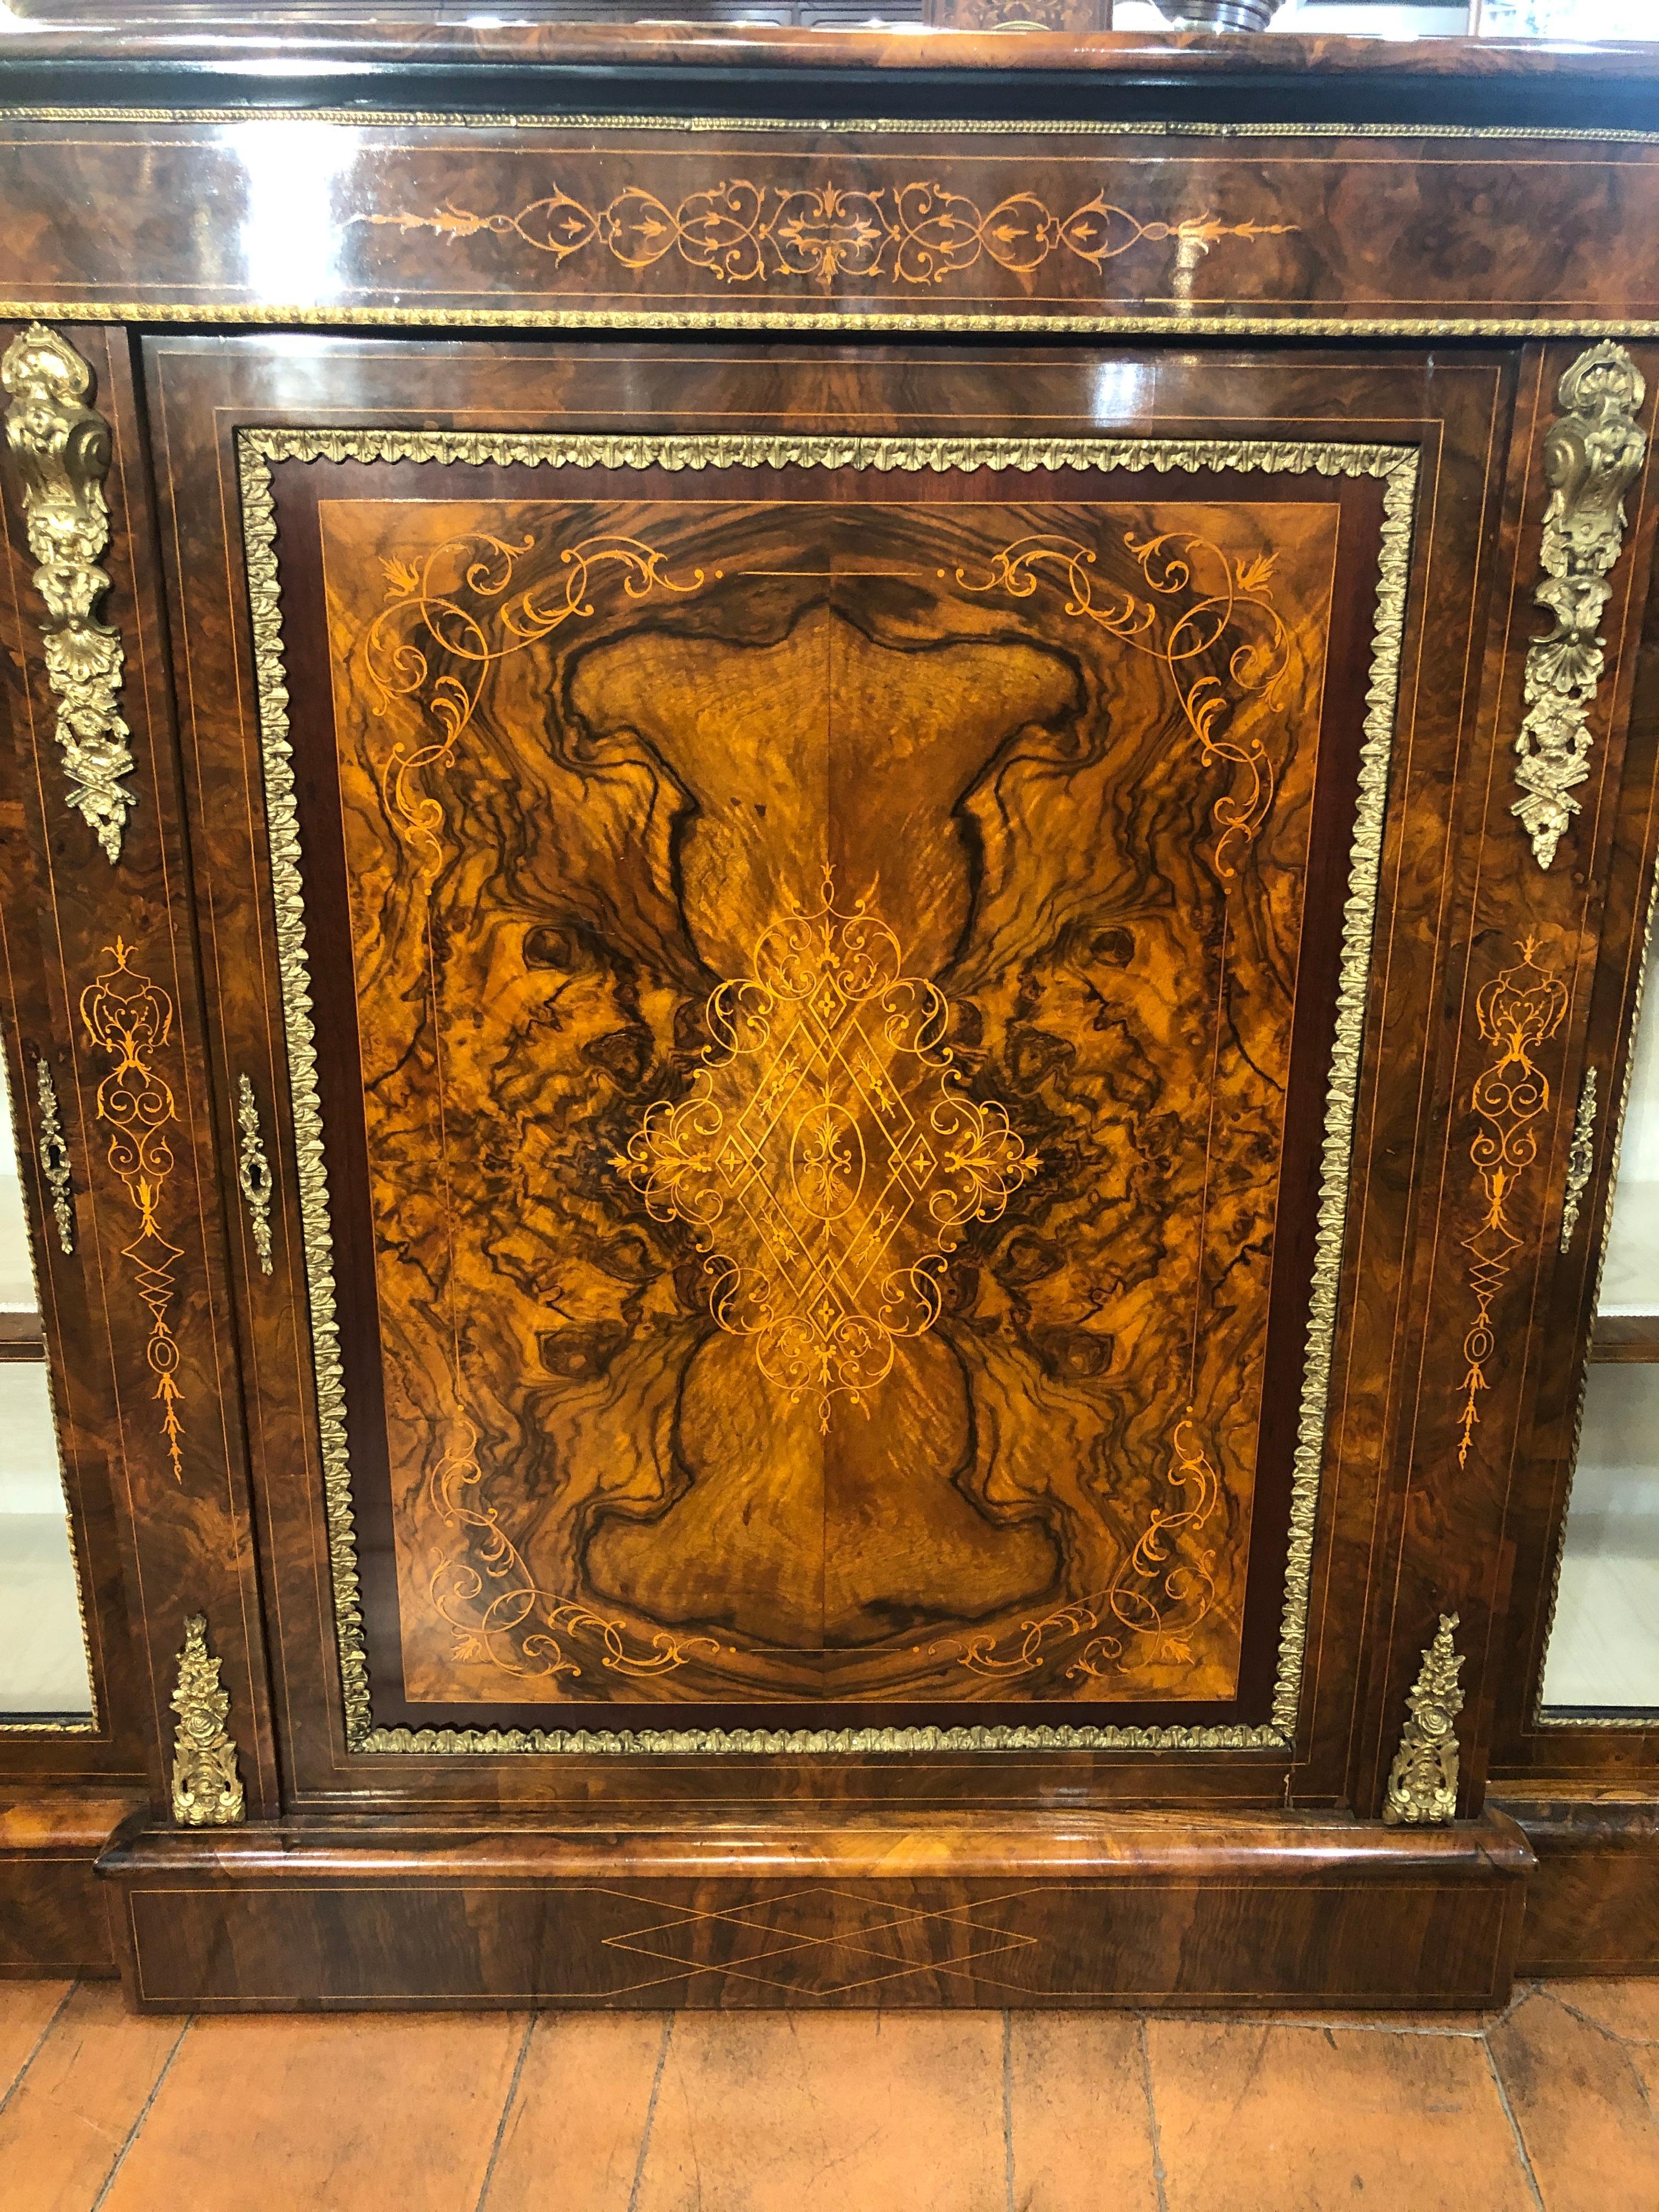 English walnut burl cabinet, Victorian period, circa 1860, inlaid with boxwood. In excellent state of conservation. Bronze applications coeve to the cabinet. Cabinet with breakfront, lateral depth 37 cm, central 40 cm.